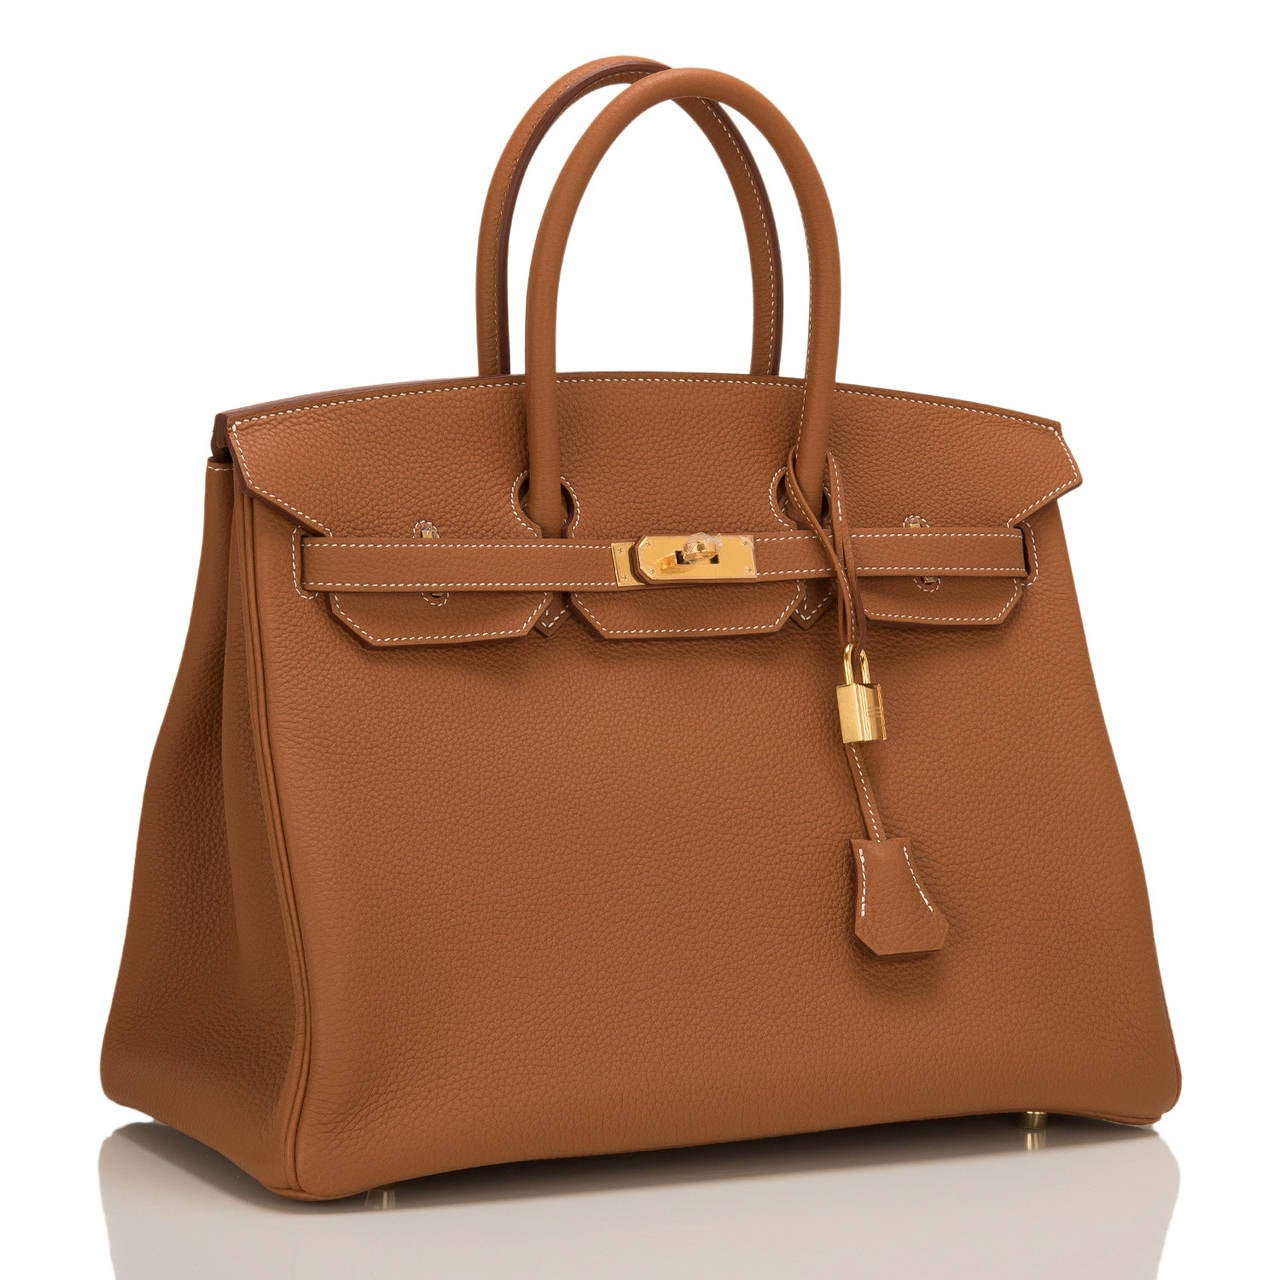 Hermes Gold Birkin 35cm in togo (bull) leather with gold hardware.

This Birkin features white contrast stitching, front toggle closure, clochette with lock and two keys, and double rolled handles.

The interior is lined in Gold chevre with one